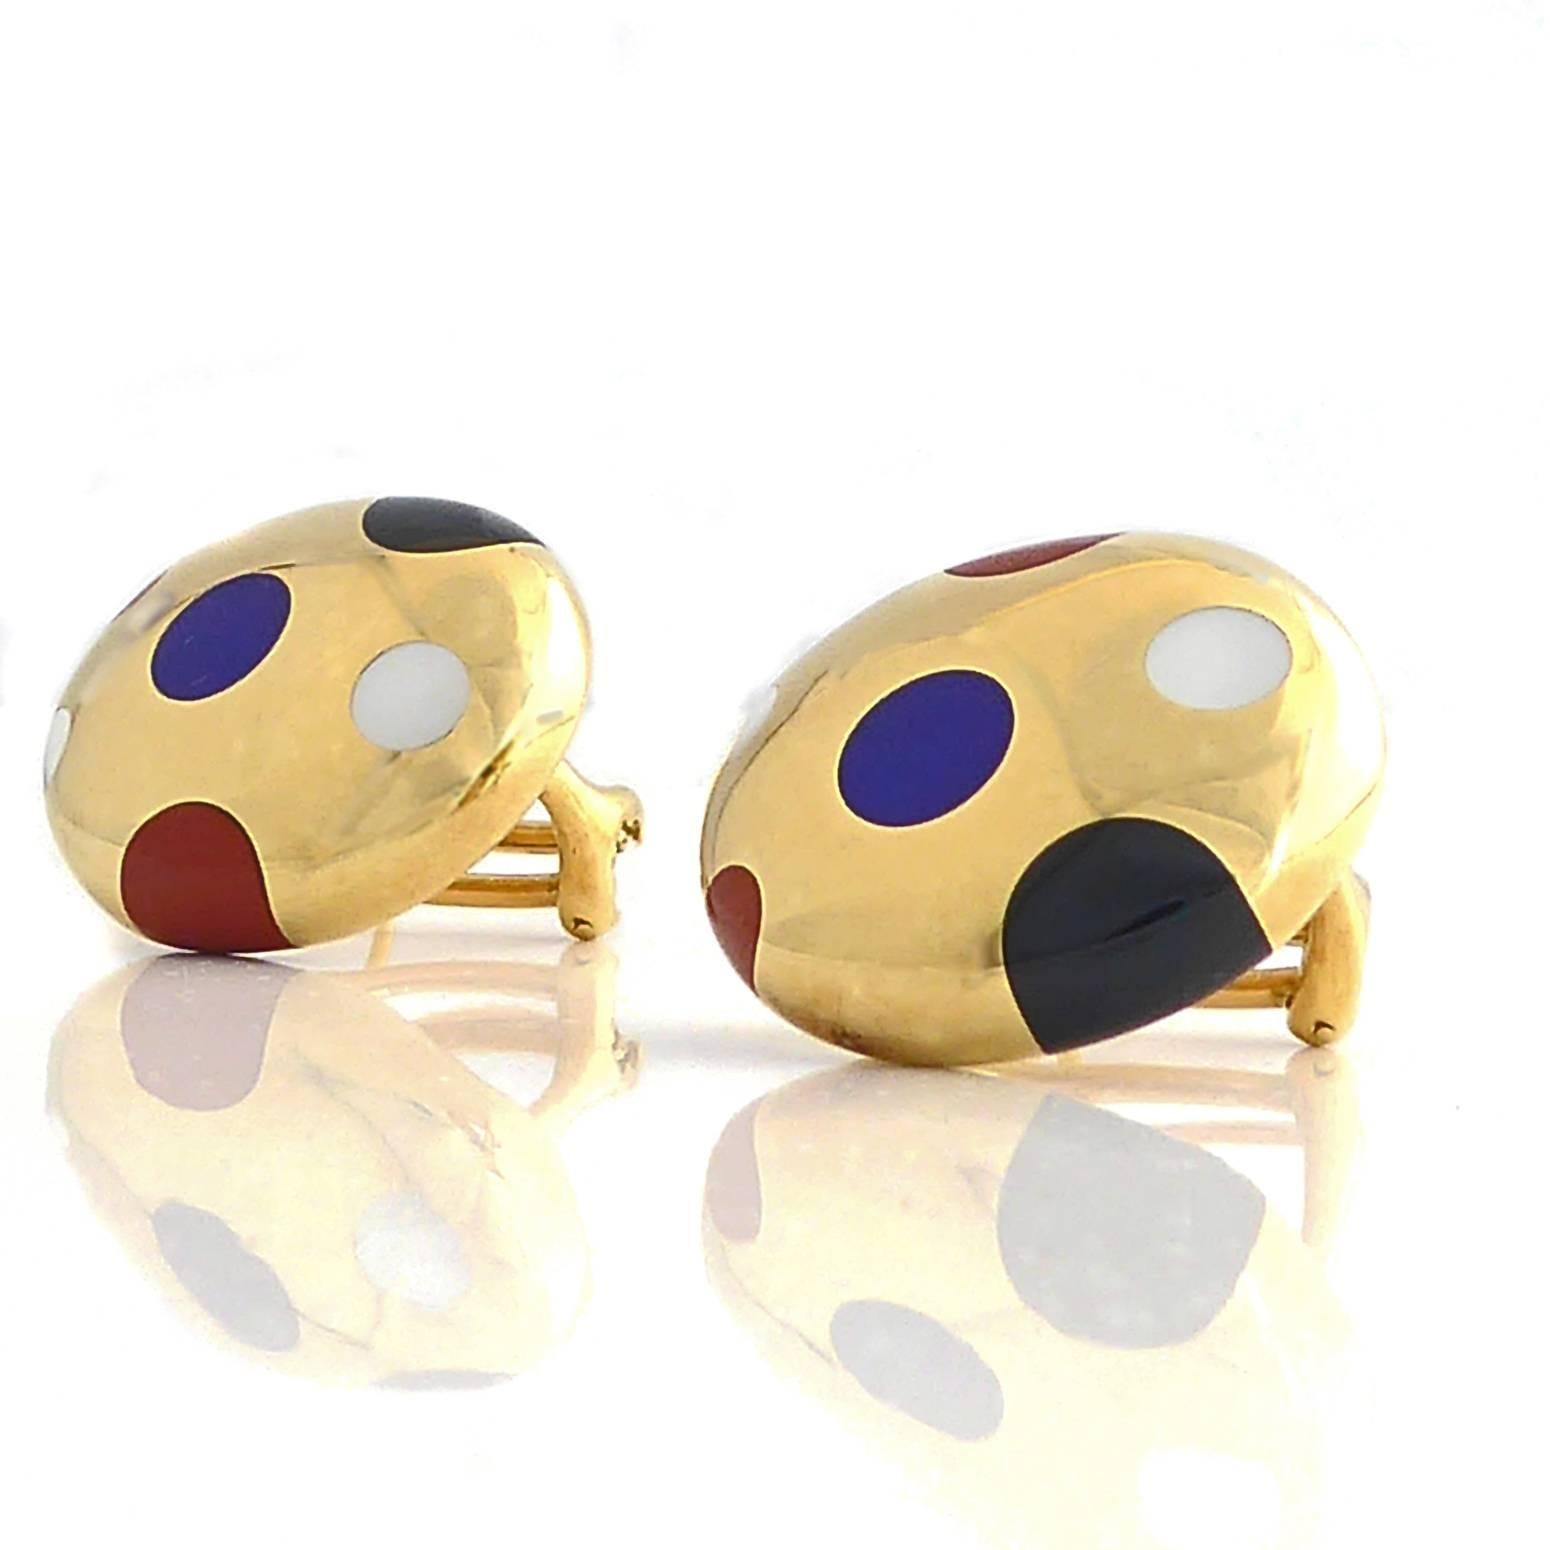 Wonderfully joyful and playful earrings designed by the renowned Tiffany jewellery designer, Angela Cummings.  Oval dome shapes in 18ct yellow gold have been inlaid with semi-precious gemstones - jasper, lapis lazuli, onyx, and mother of